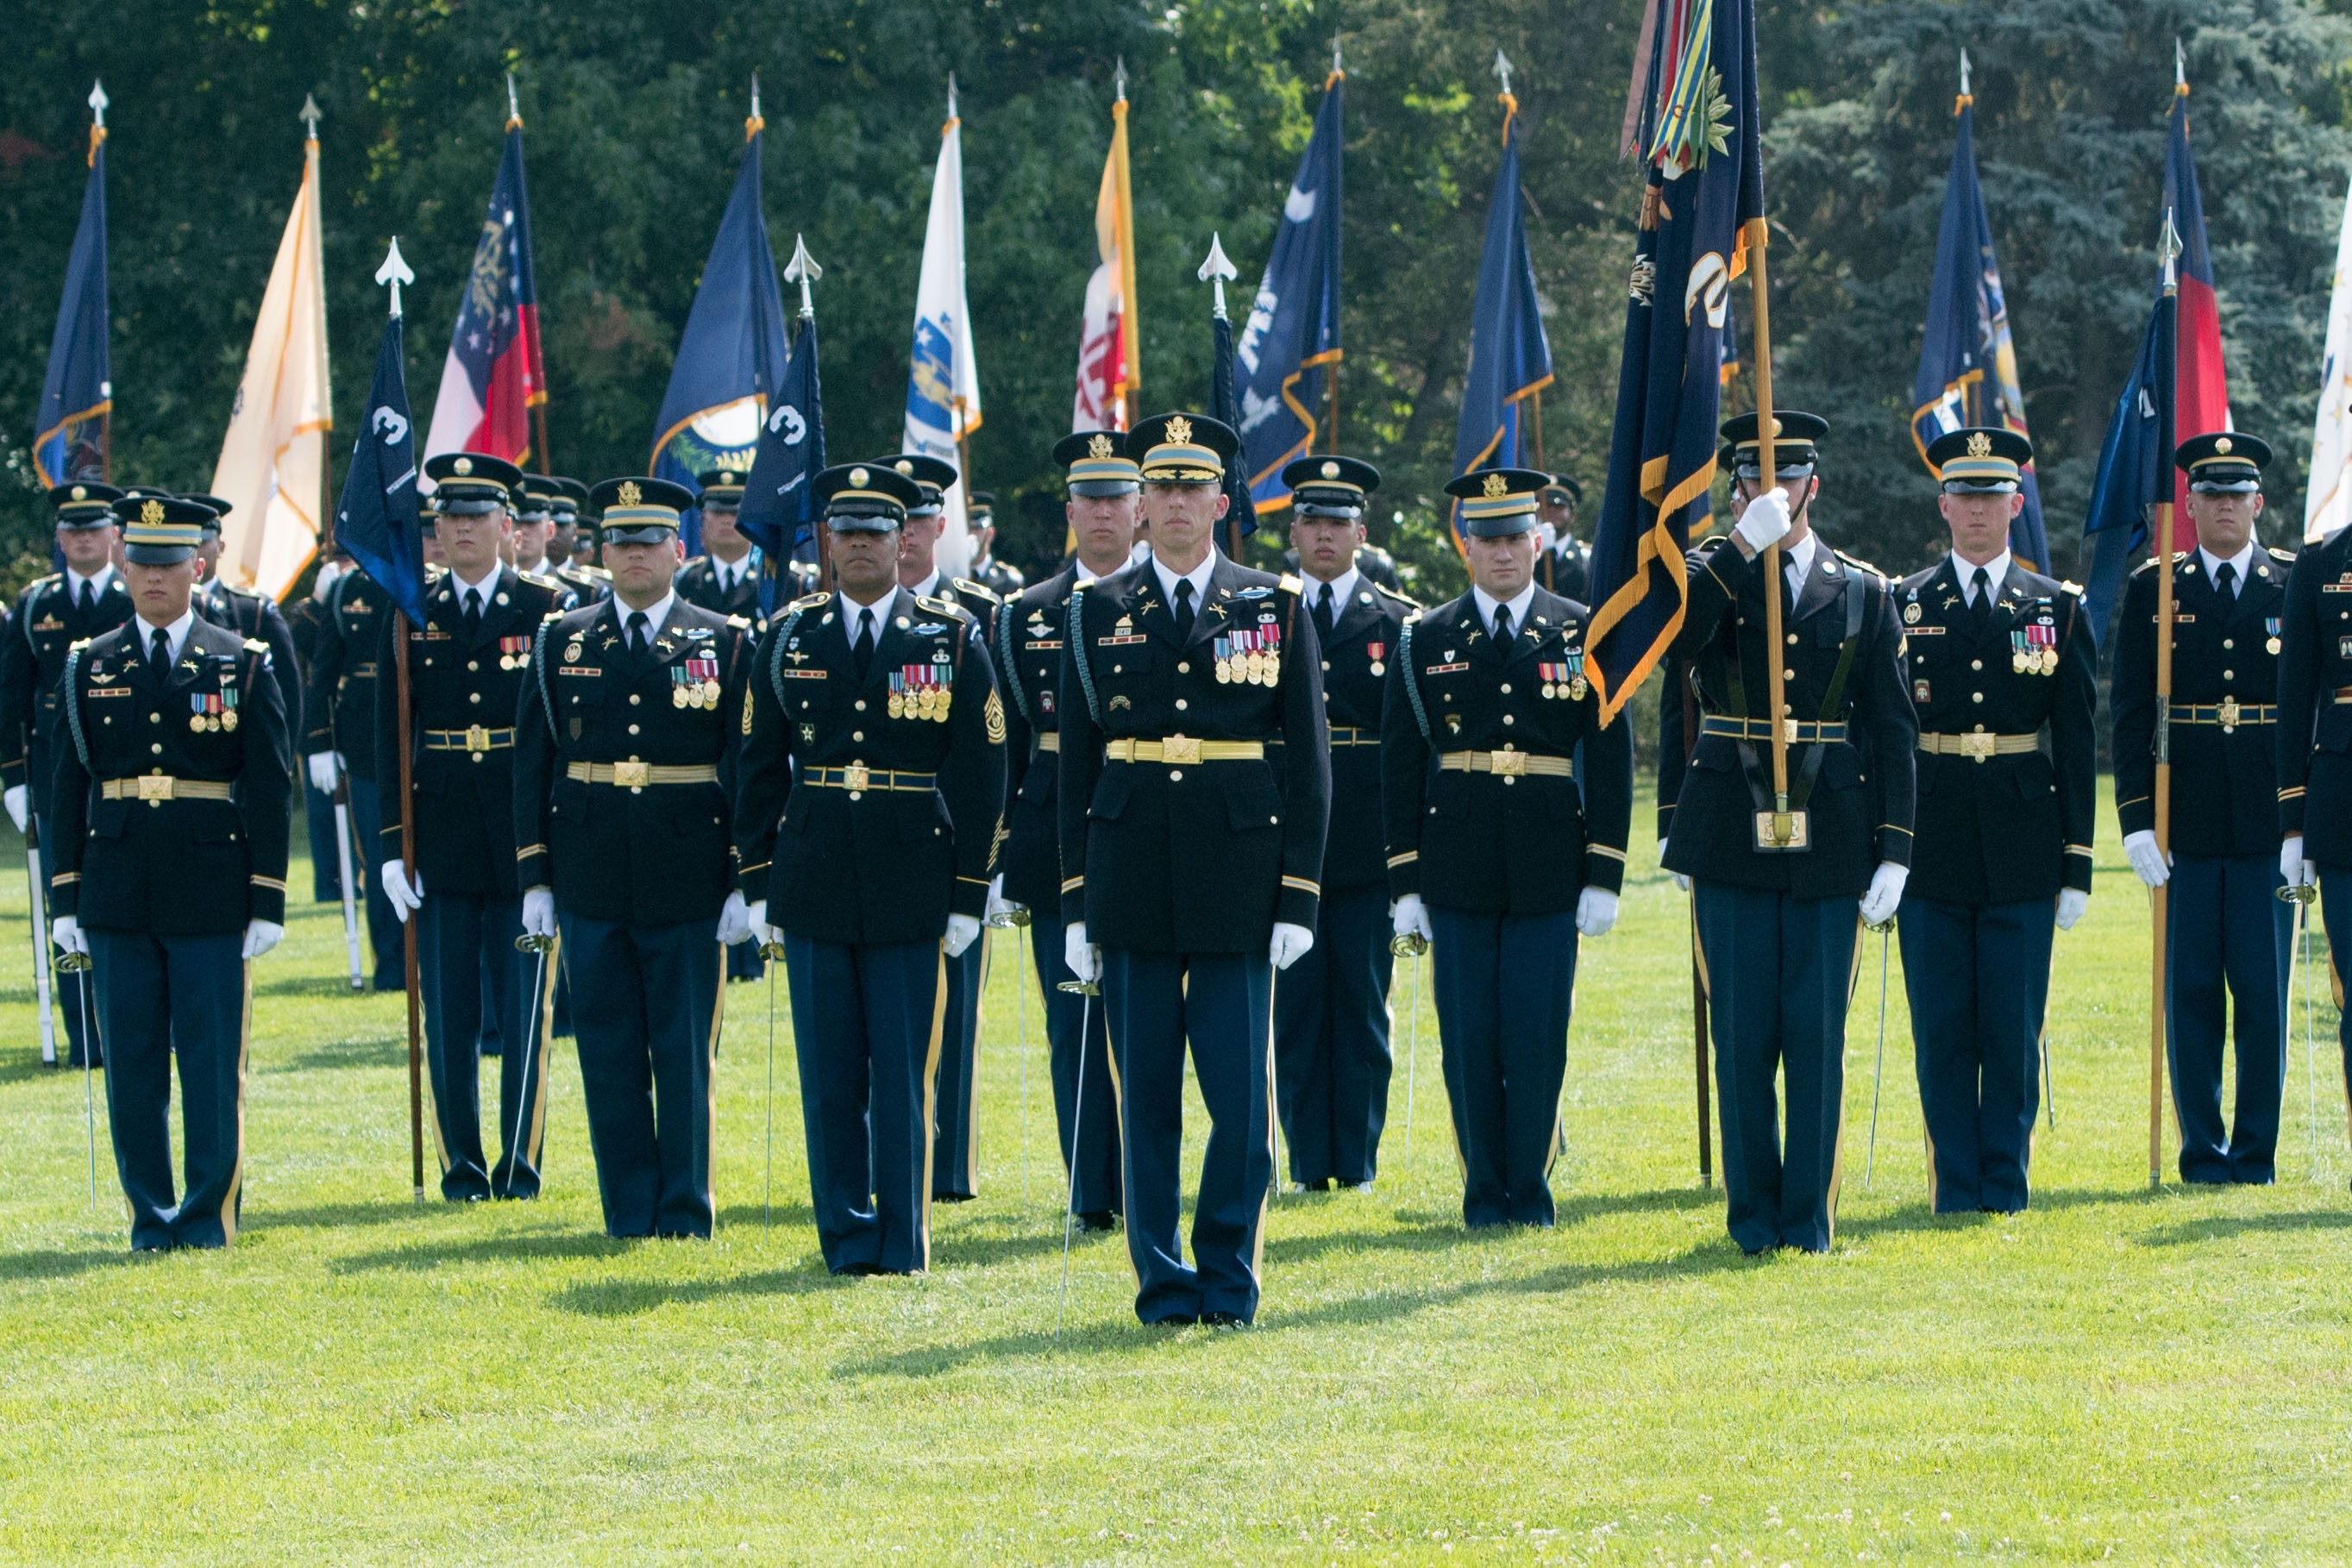 The Old Guard Bid Farewell During Change Command Responsibility